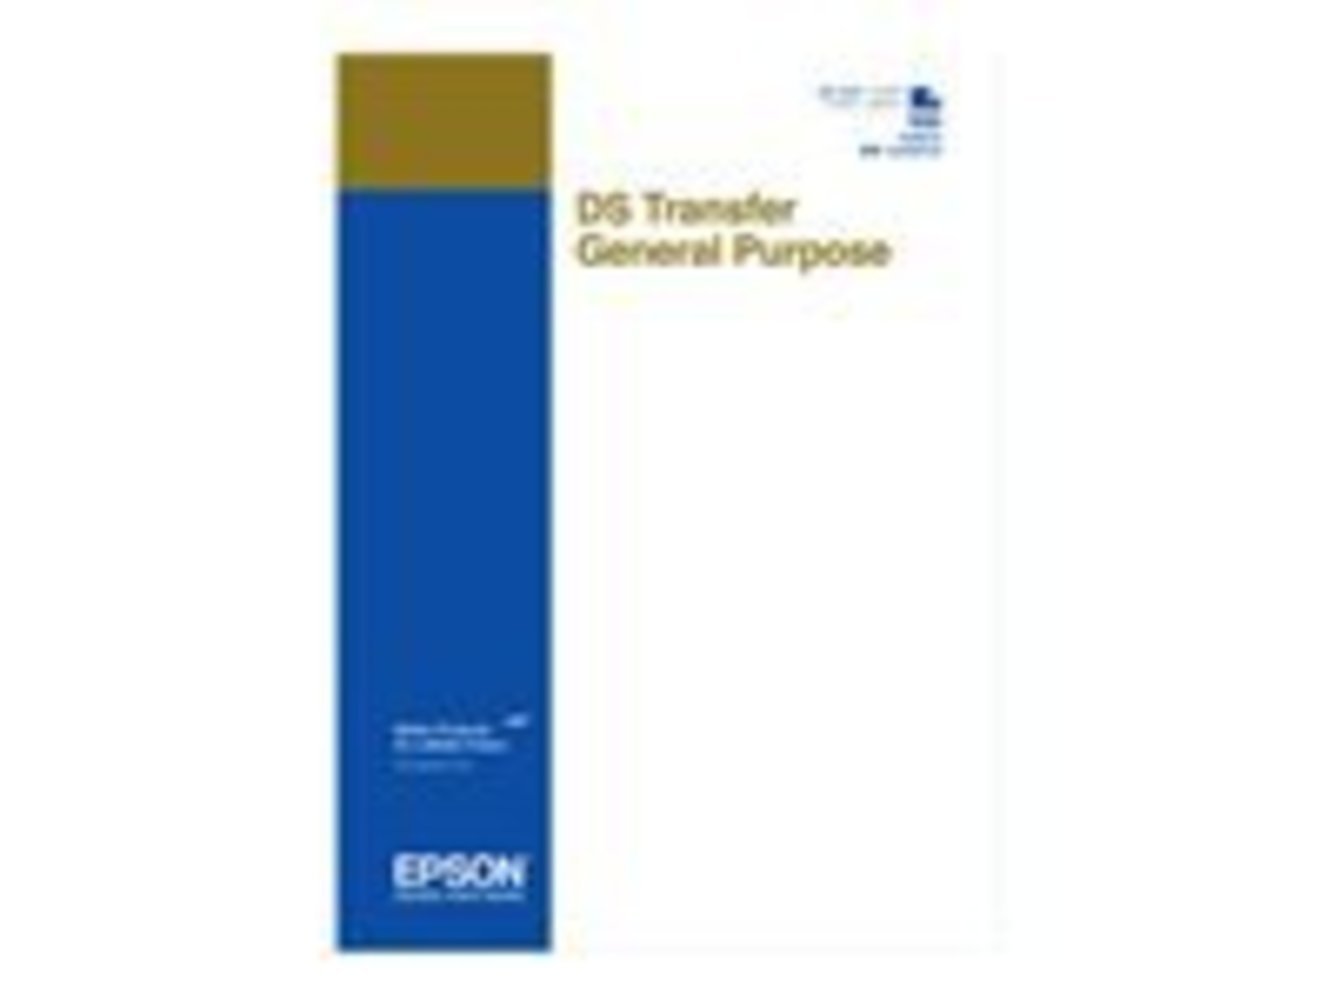 EPSON DS Transfer General Purpose A4 Sheets